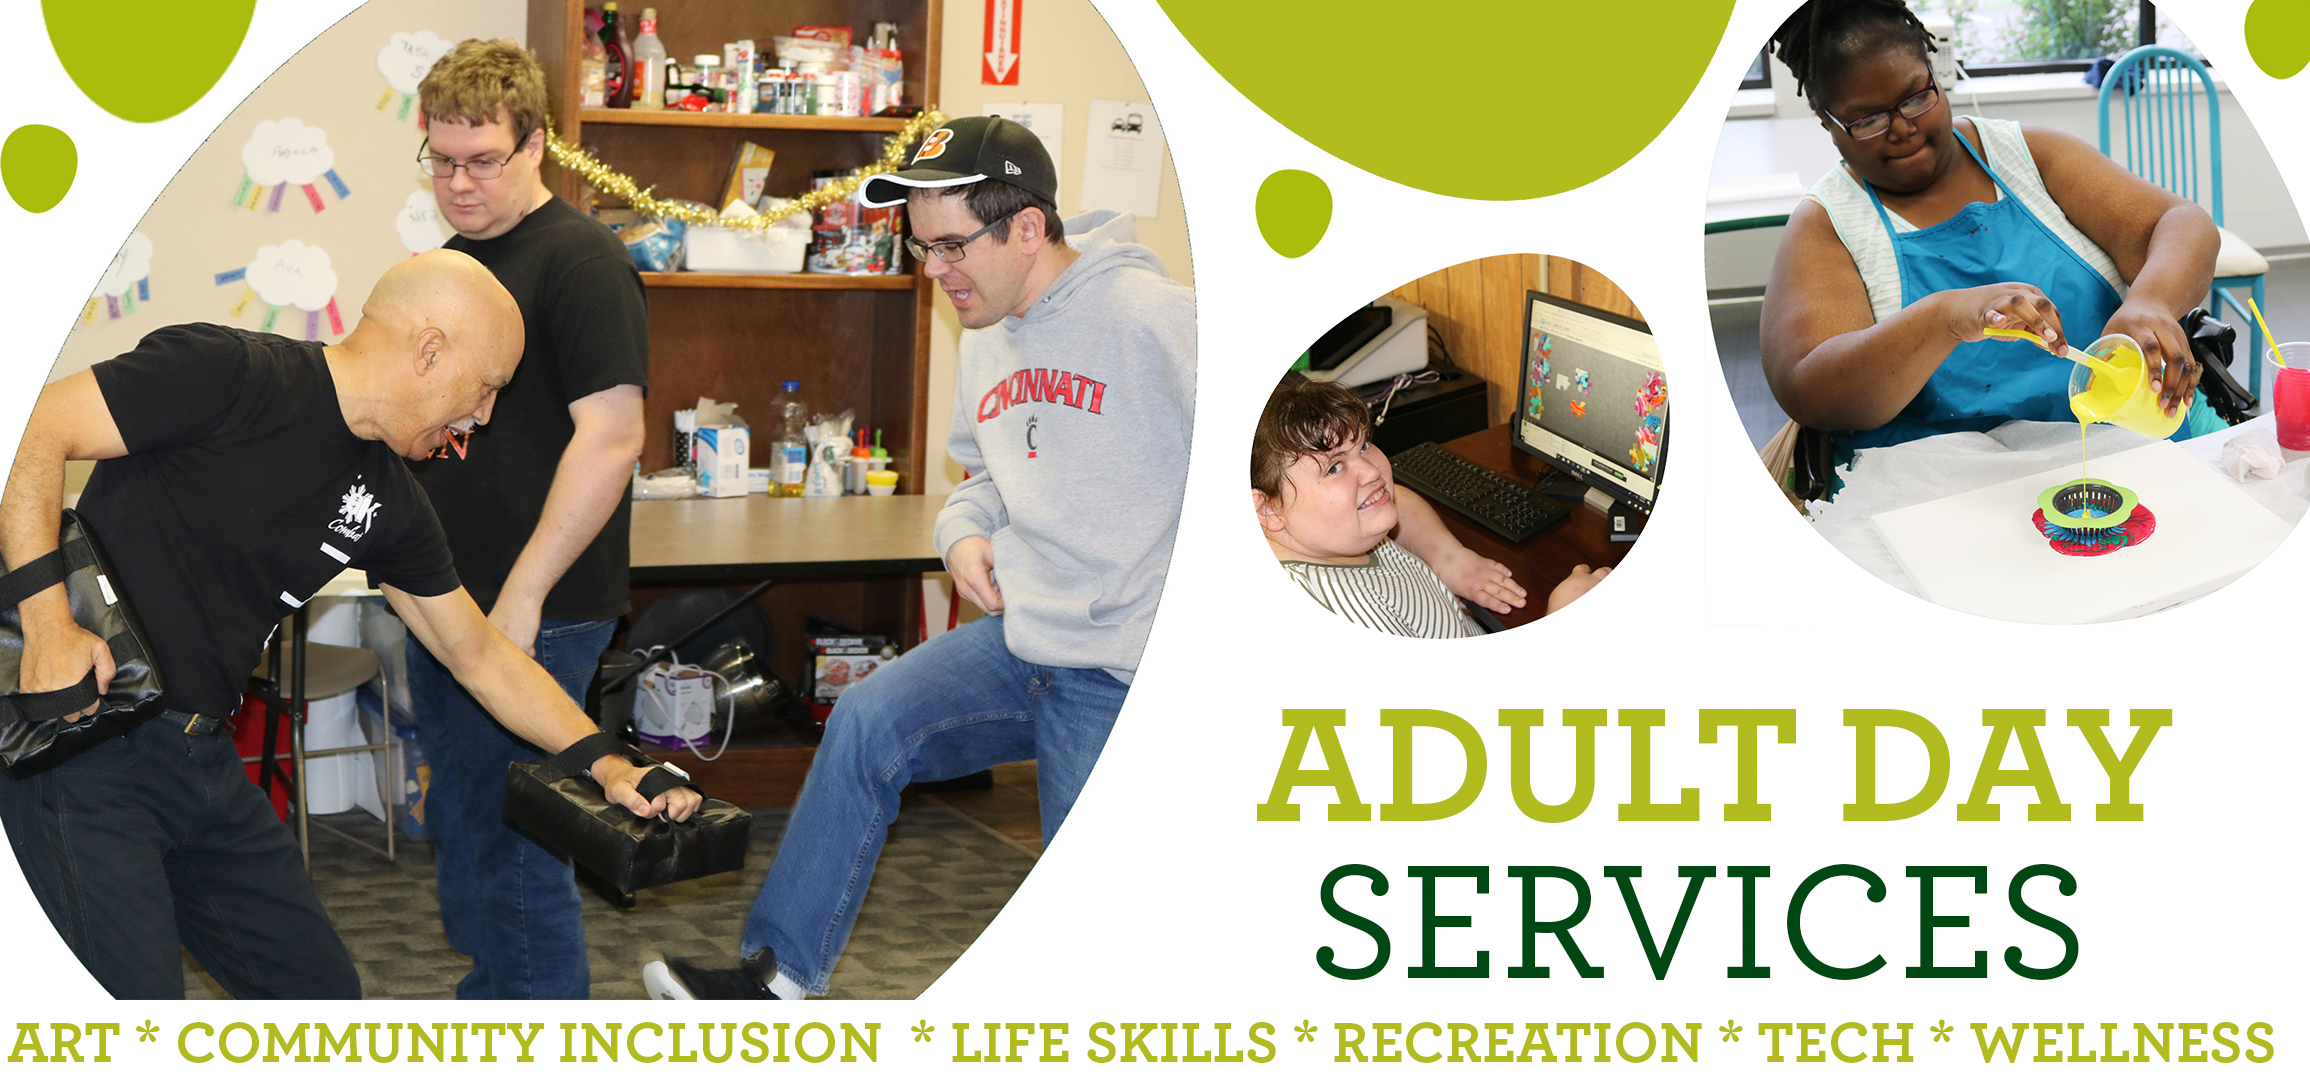 Stepping Stones Adult Day Services Program for Individuals with Disabilities I Greater Cincinnati